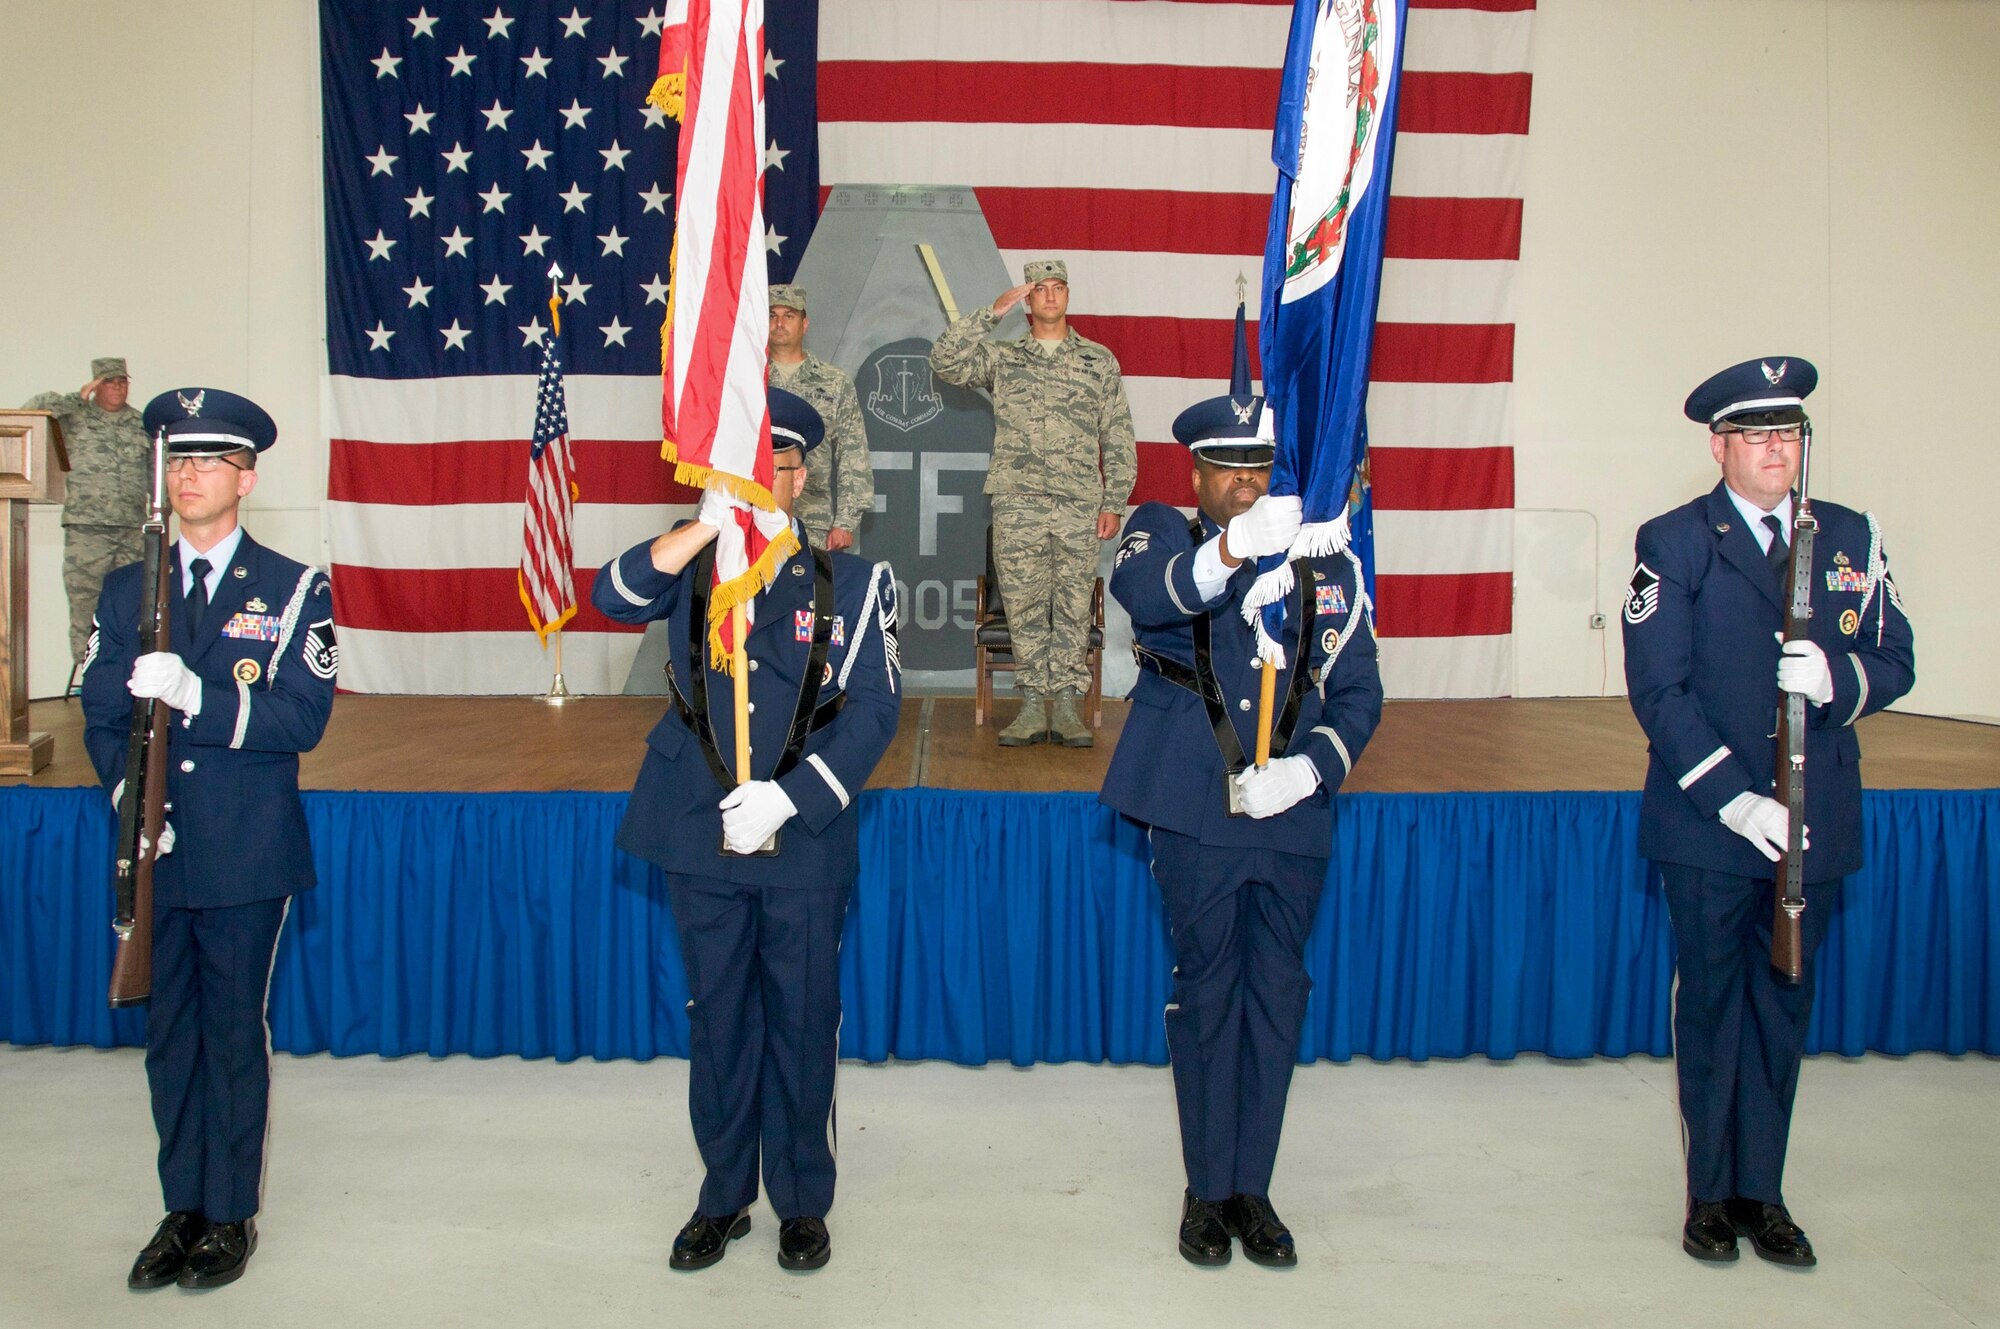 Members of the 192nd Fighter Wing honor guard present the colors at the start of the assumption of command ceremony for the 192nd Maintenance Squadron at Joint Base Langley-Eustis, Virginia, May 21, 2017. (U.S. Air National Guard photo by Senior Airman Kellyann Novak)